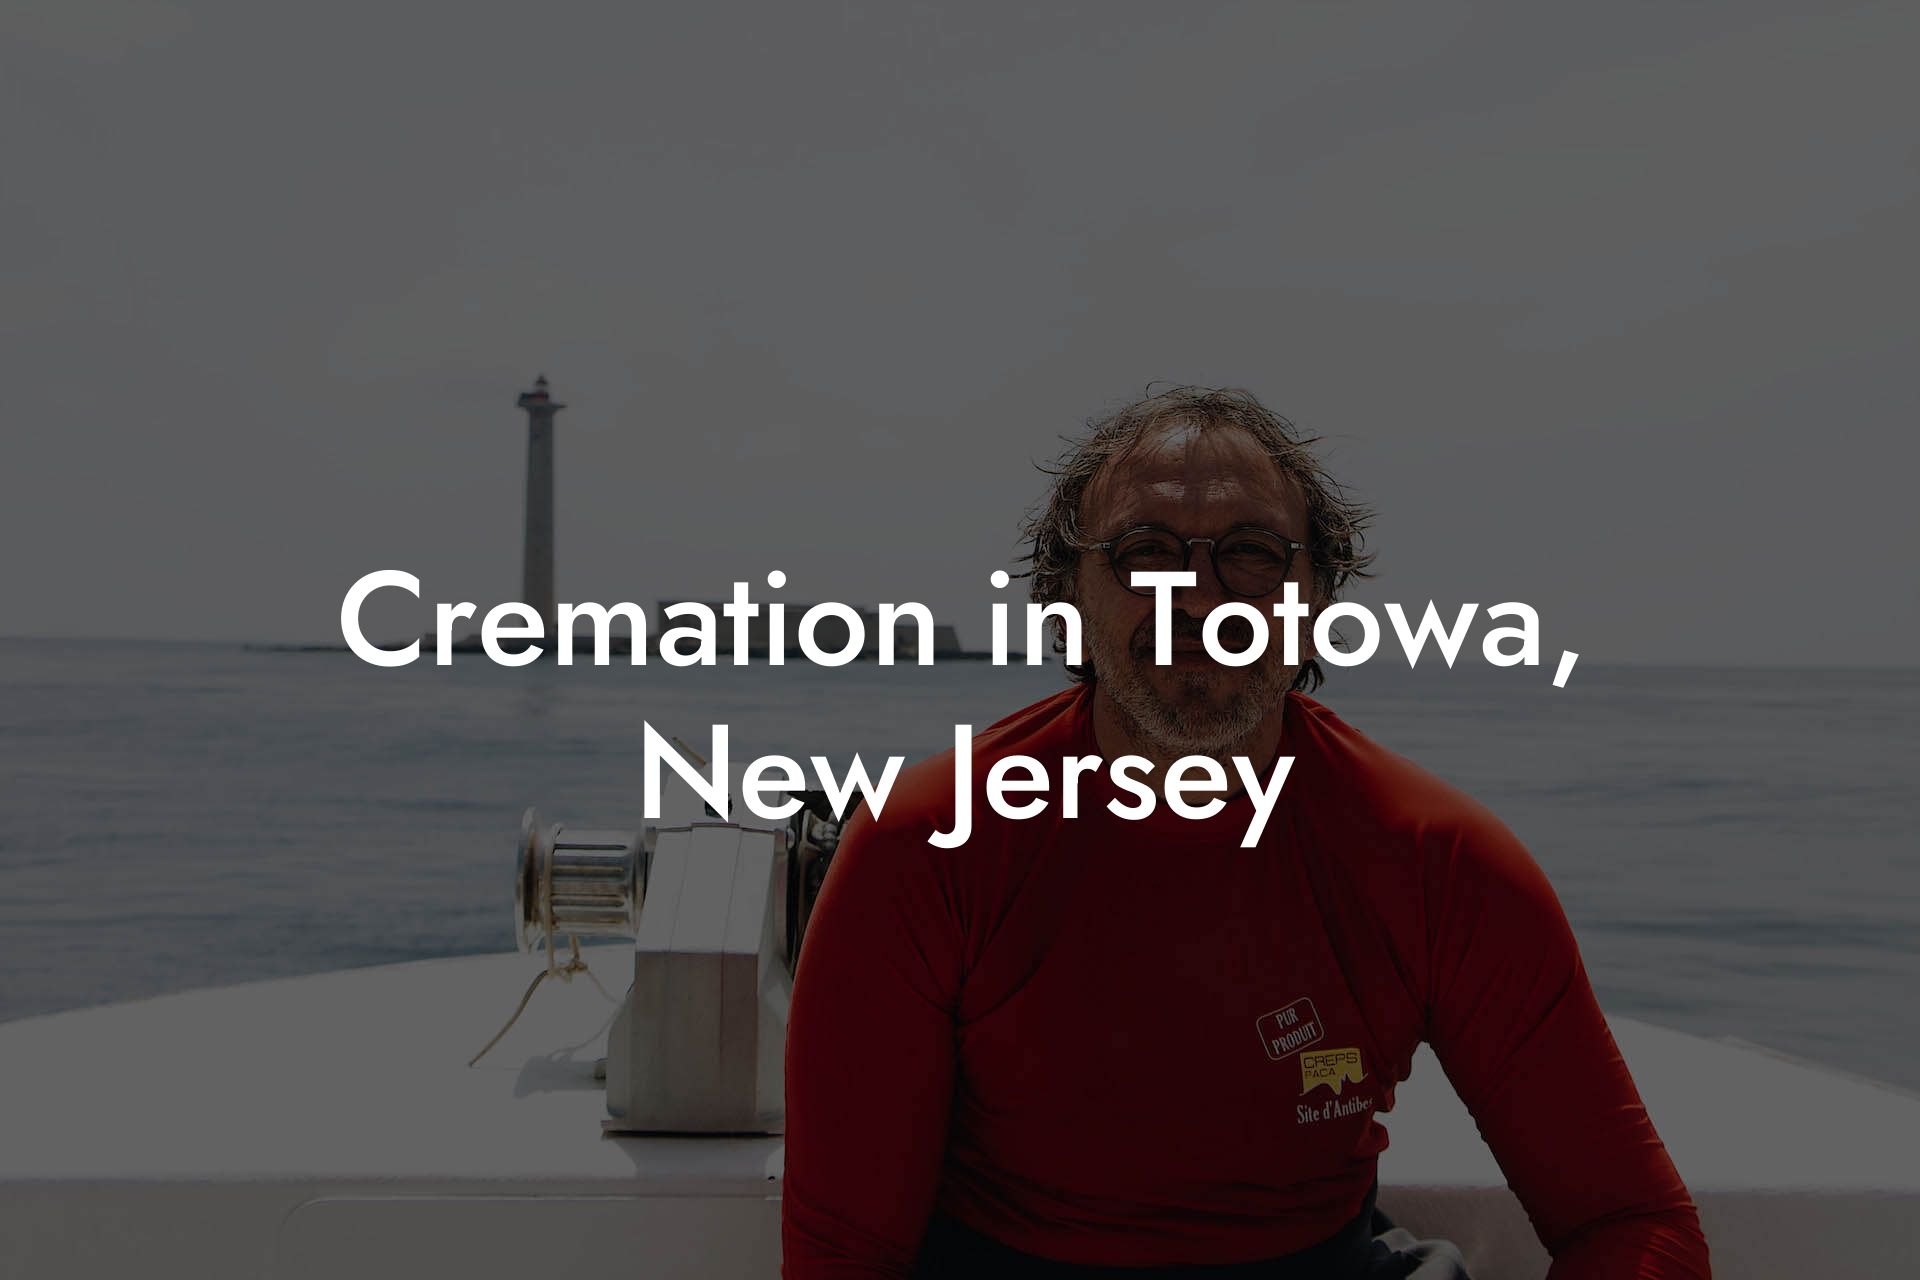 Cremation in Totowa, New Jersey